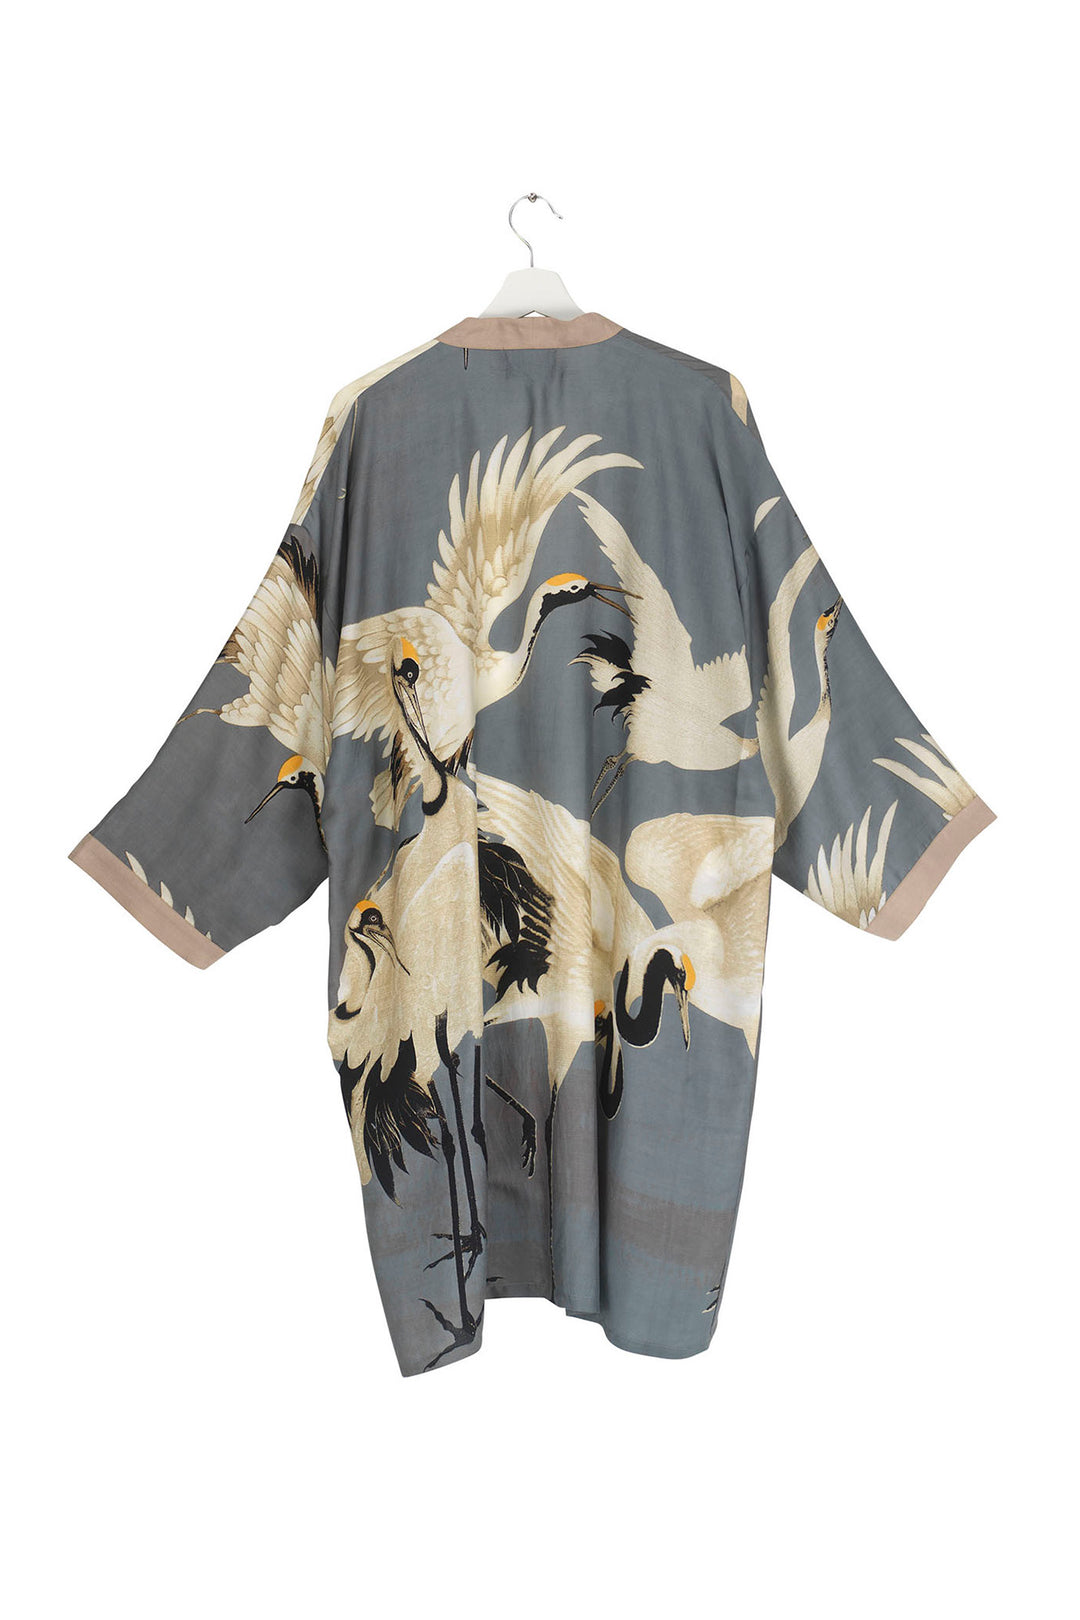 This One Hundred Stars Stork Crane Slate Grey Collar Kimono is perfect for adding over jeans or dressing up with your favourite going out look. 